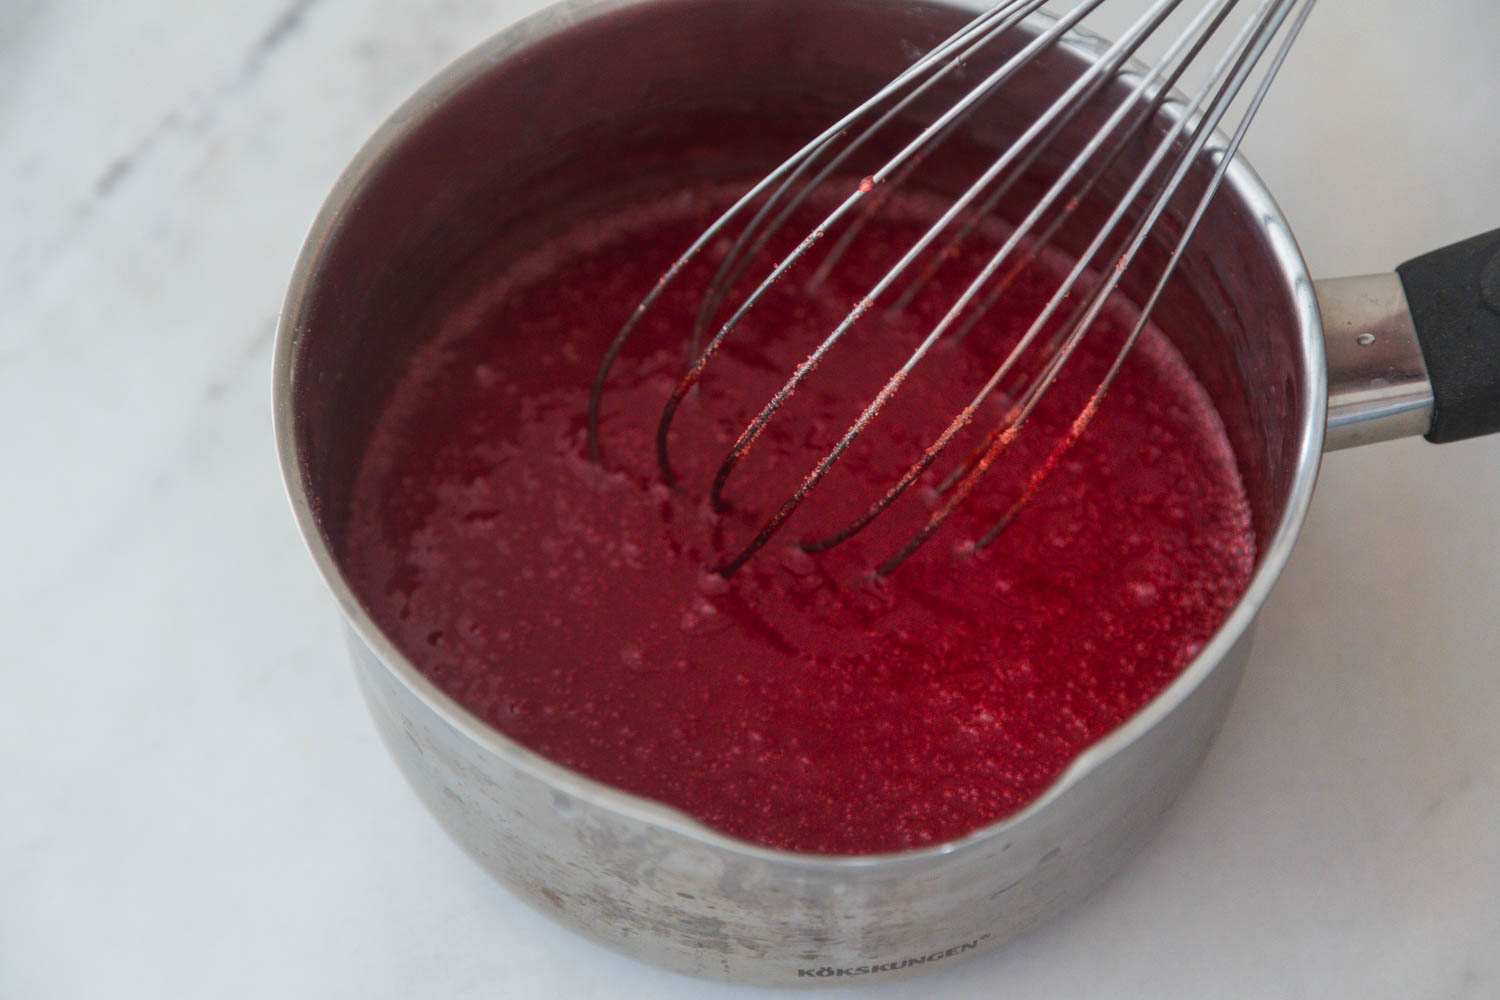 Mixing the strawberry gelatine in a saucepan